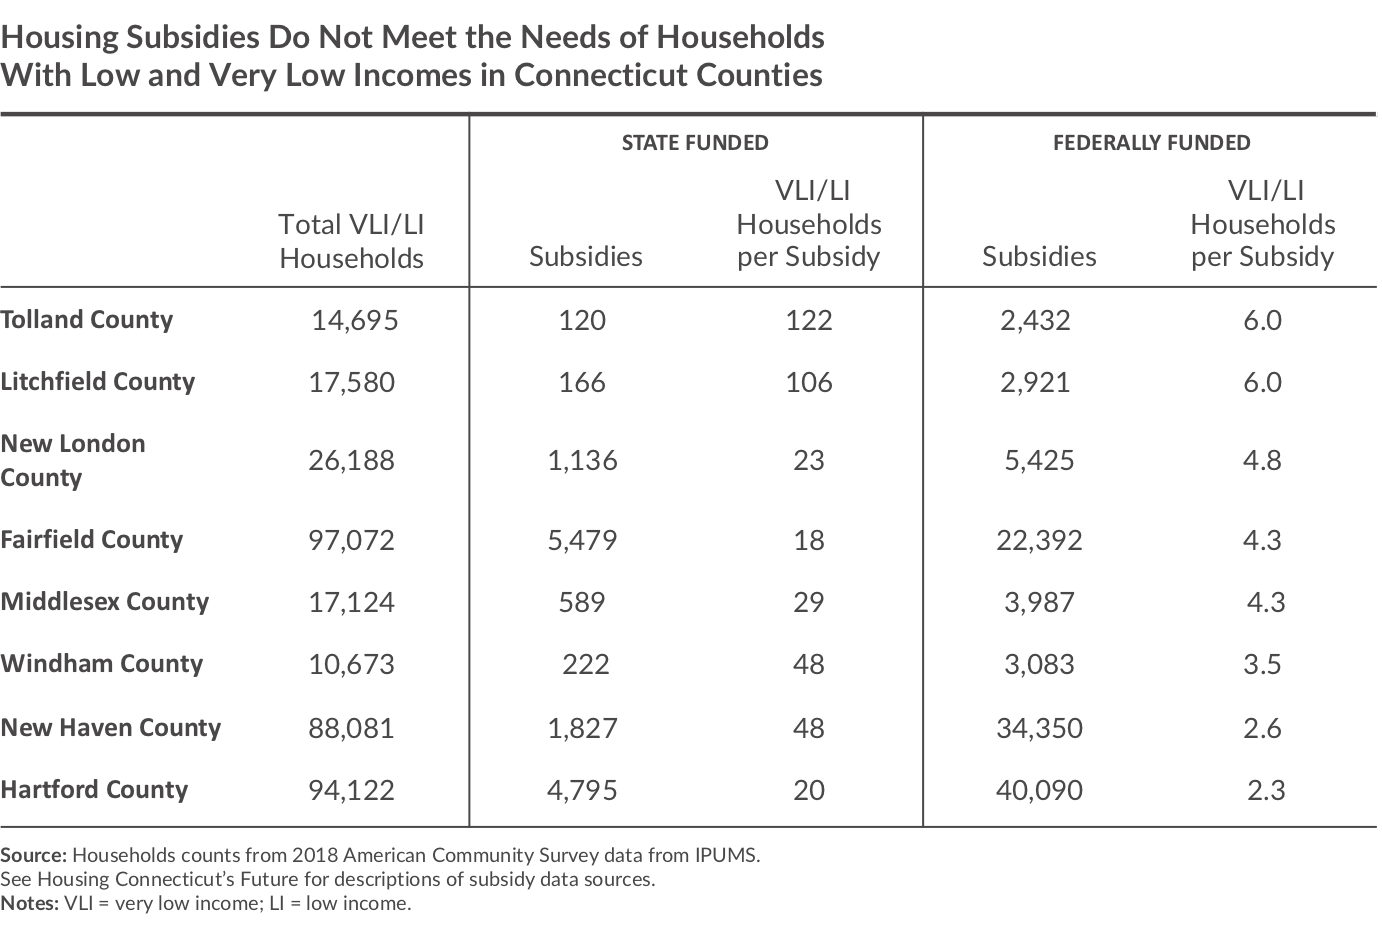 Table showing housing subsidies don't meet the needs of households with low and very low incomes in Connecticut counties